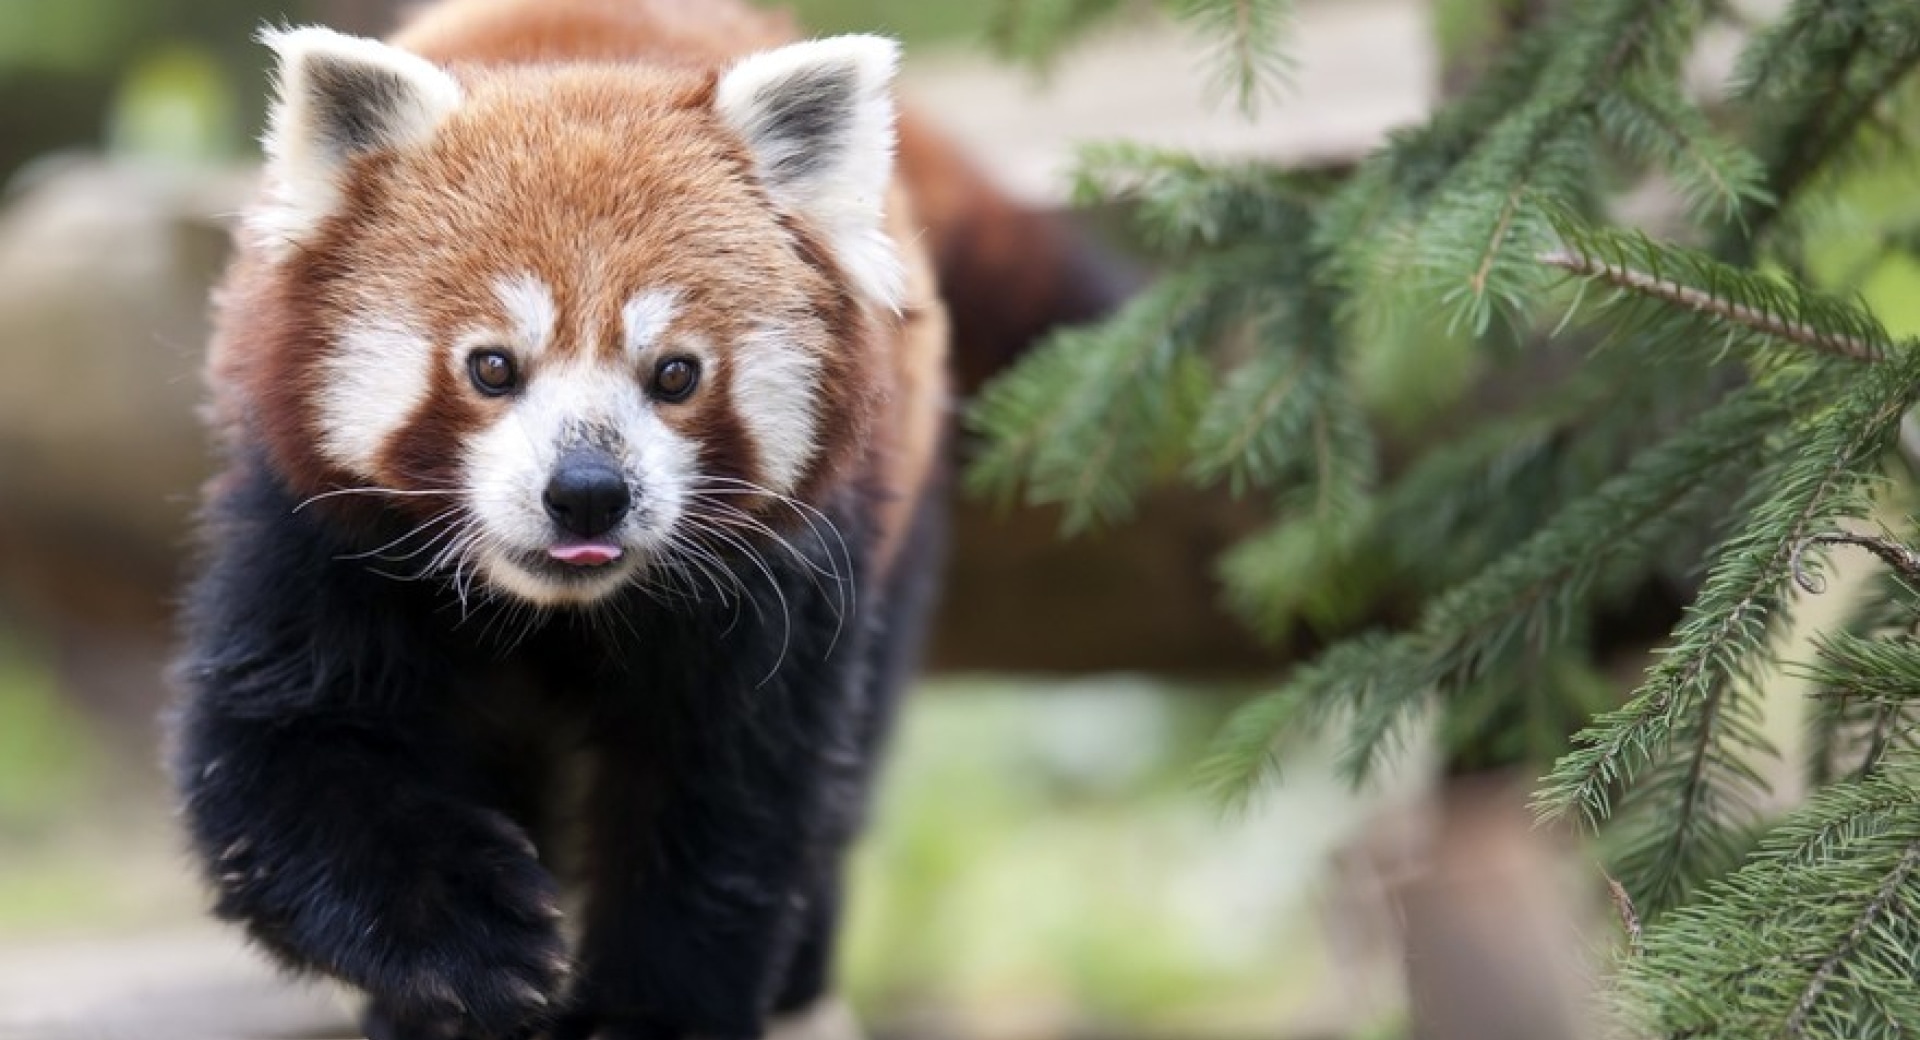 A Trip to the Zoo Becomes a Boon to Red Pandas Worldwide